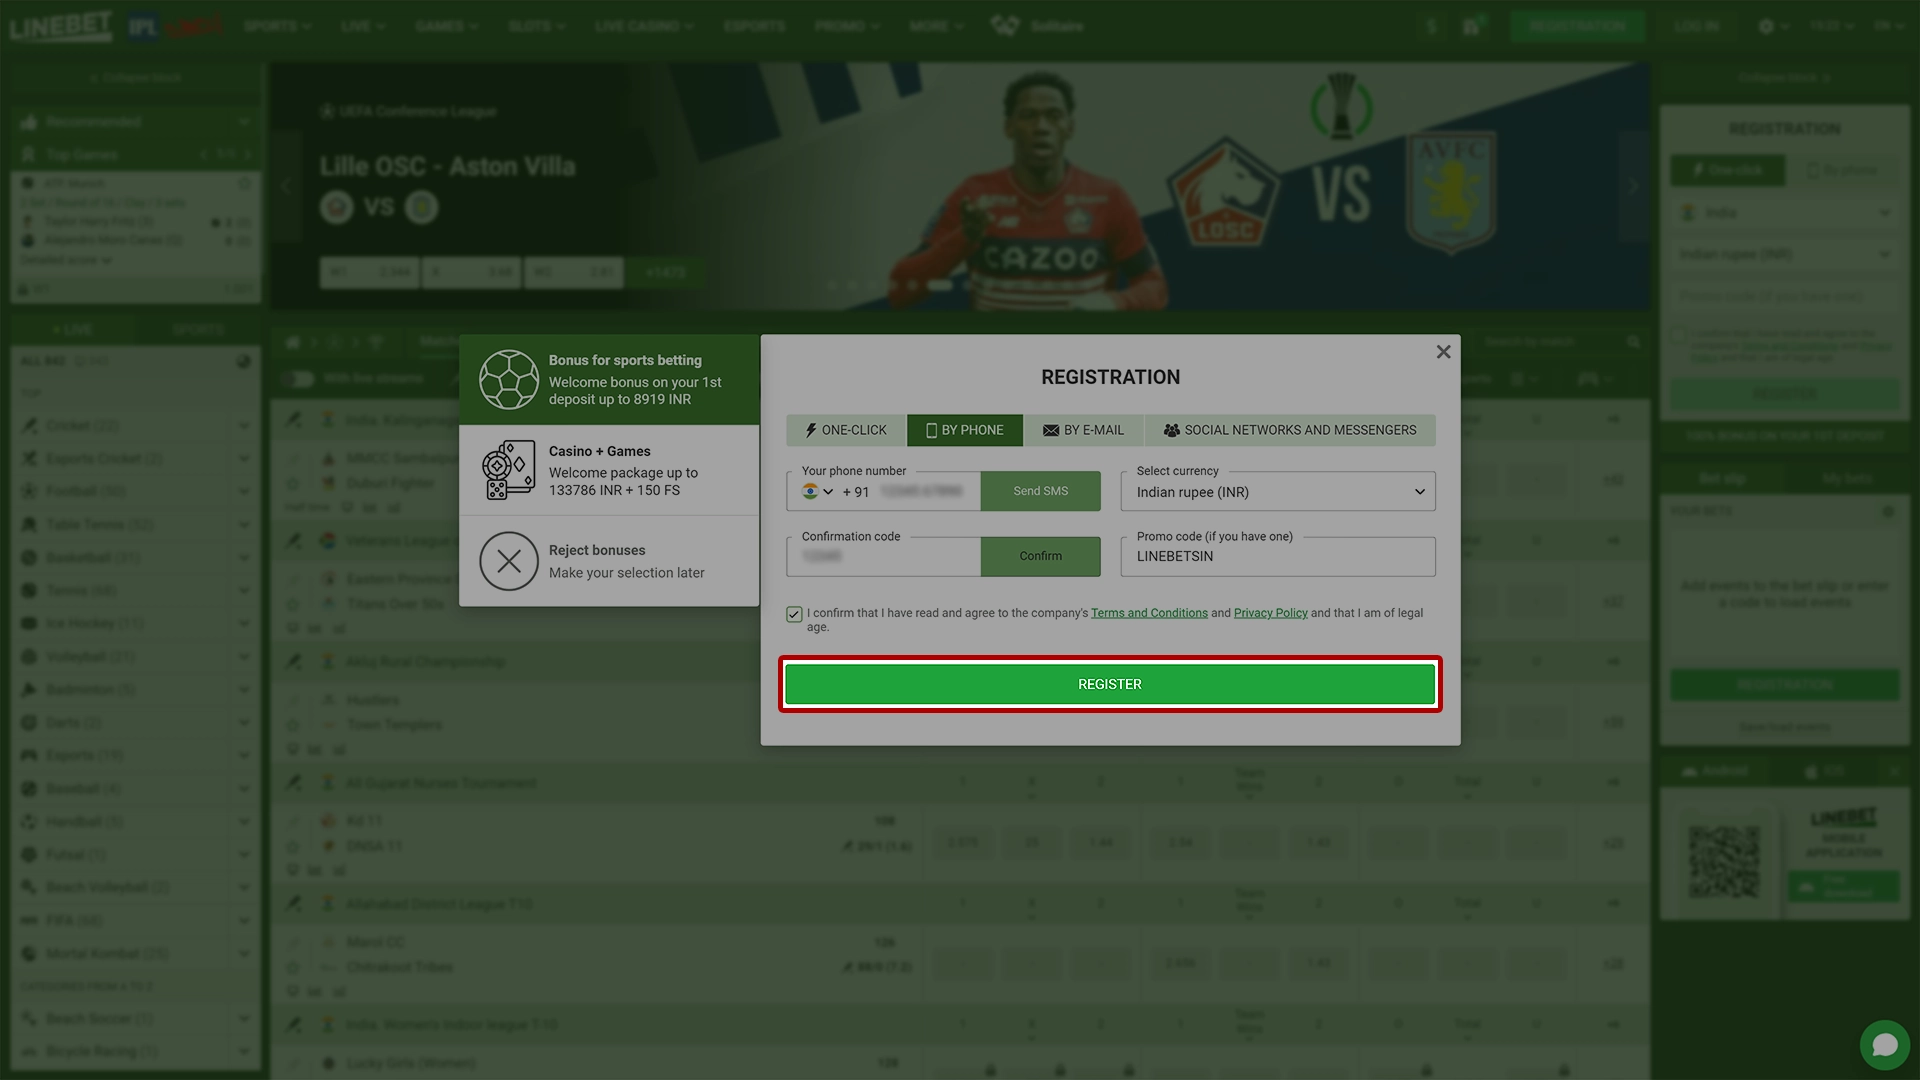 Confirm the creation of your Linebet account.